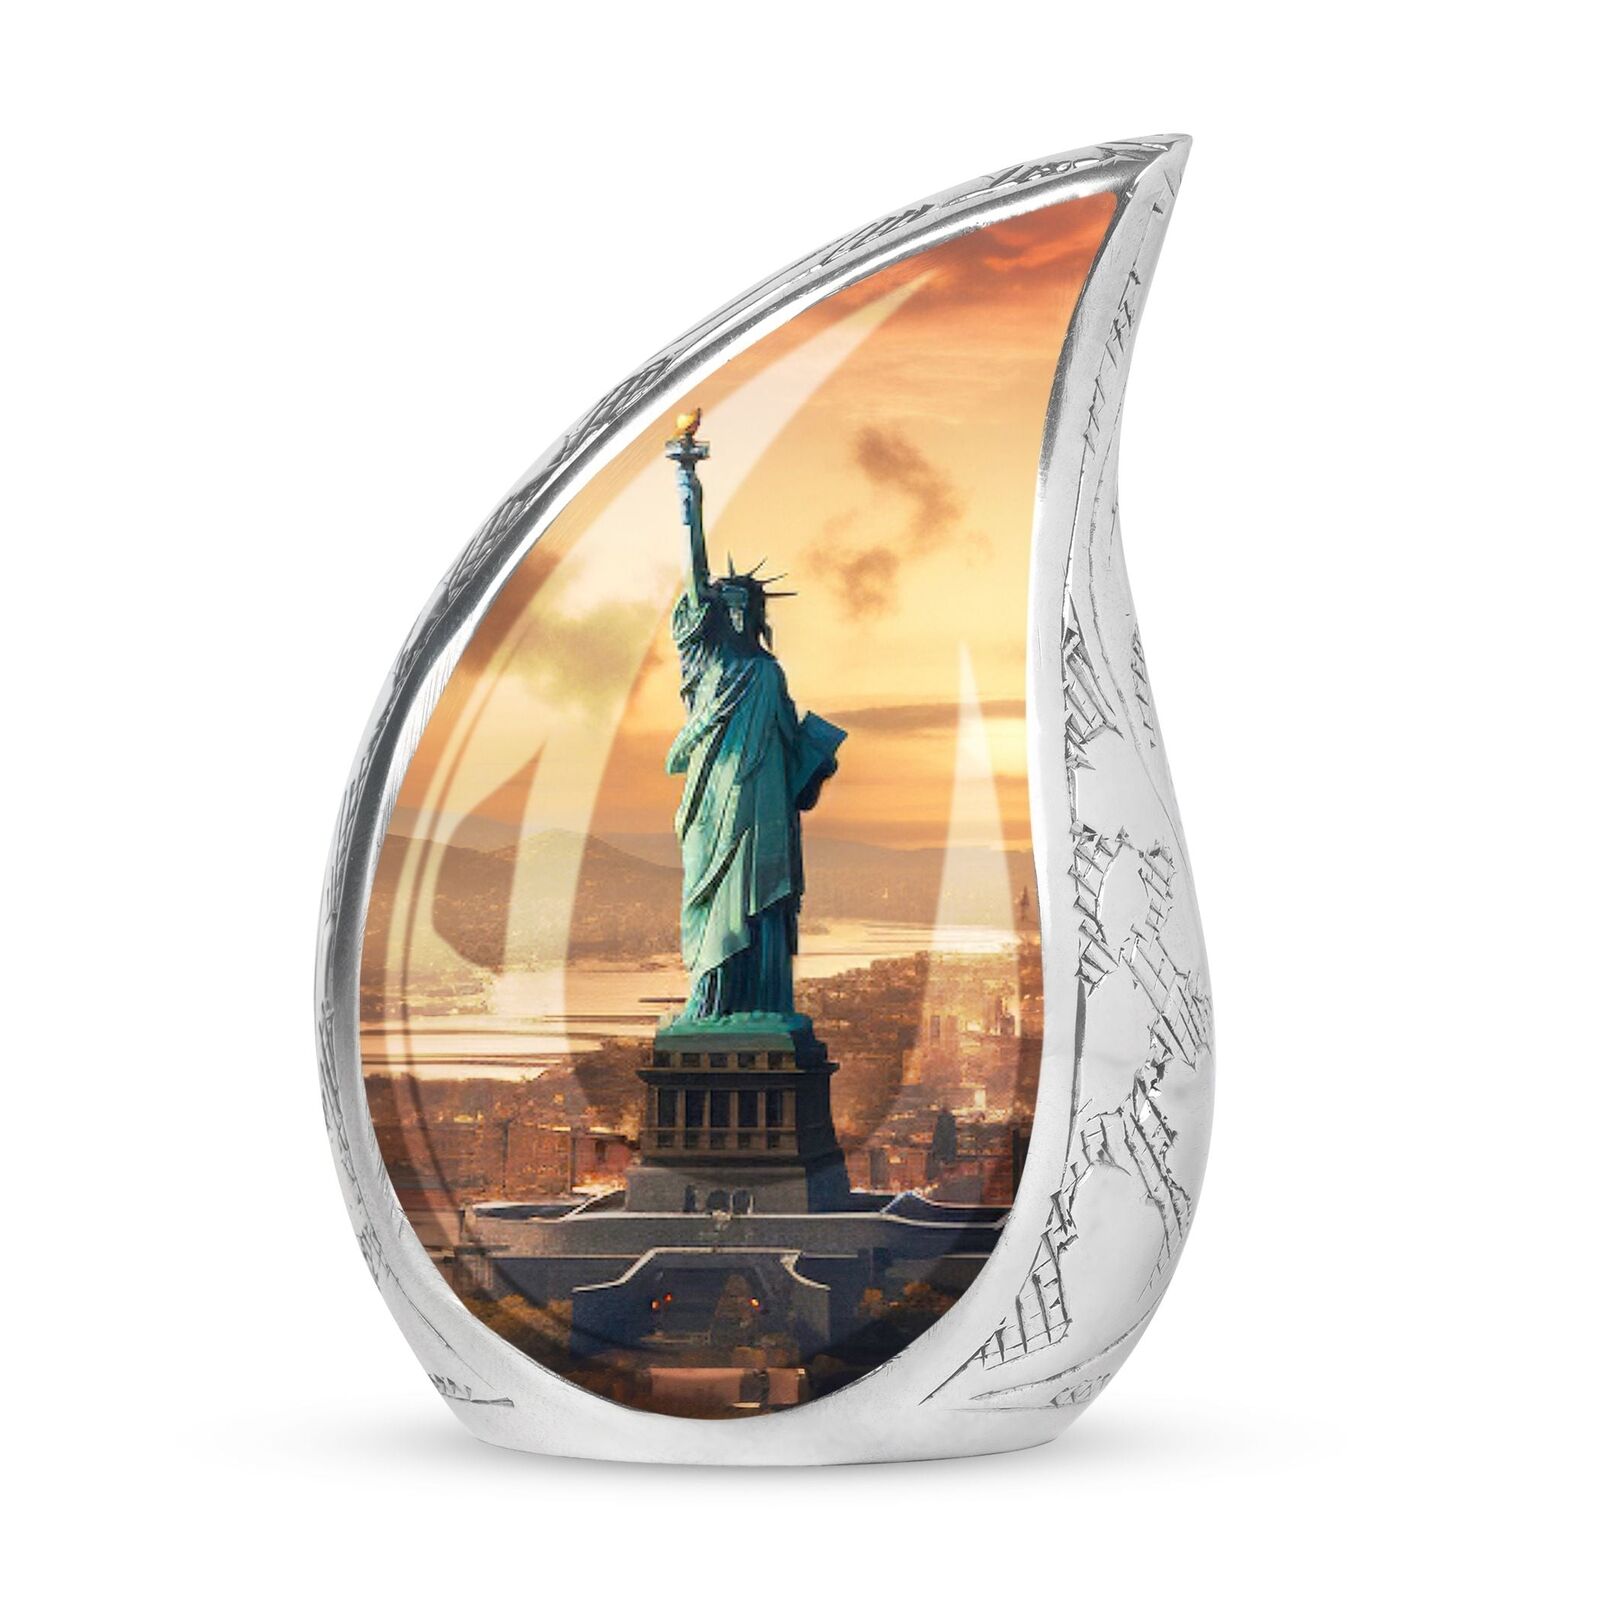 Experience the Statue of Liberty Full View with These Unique Ashes in an Urn